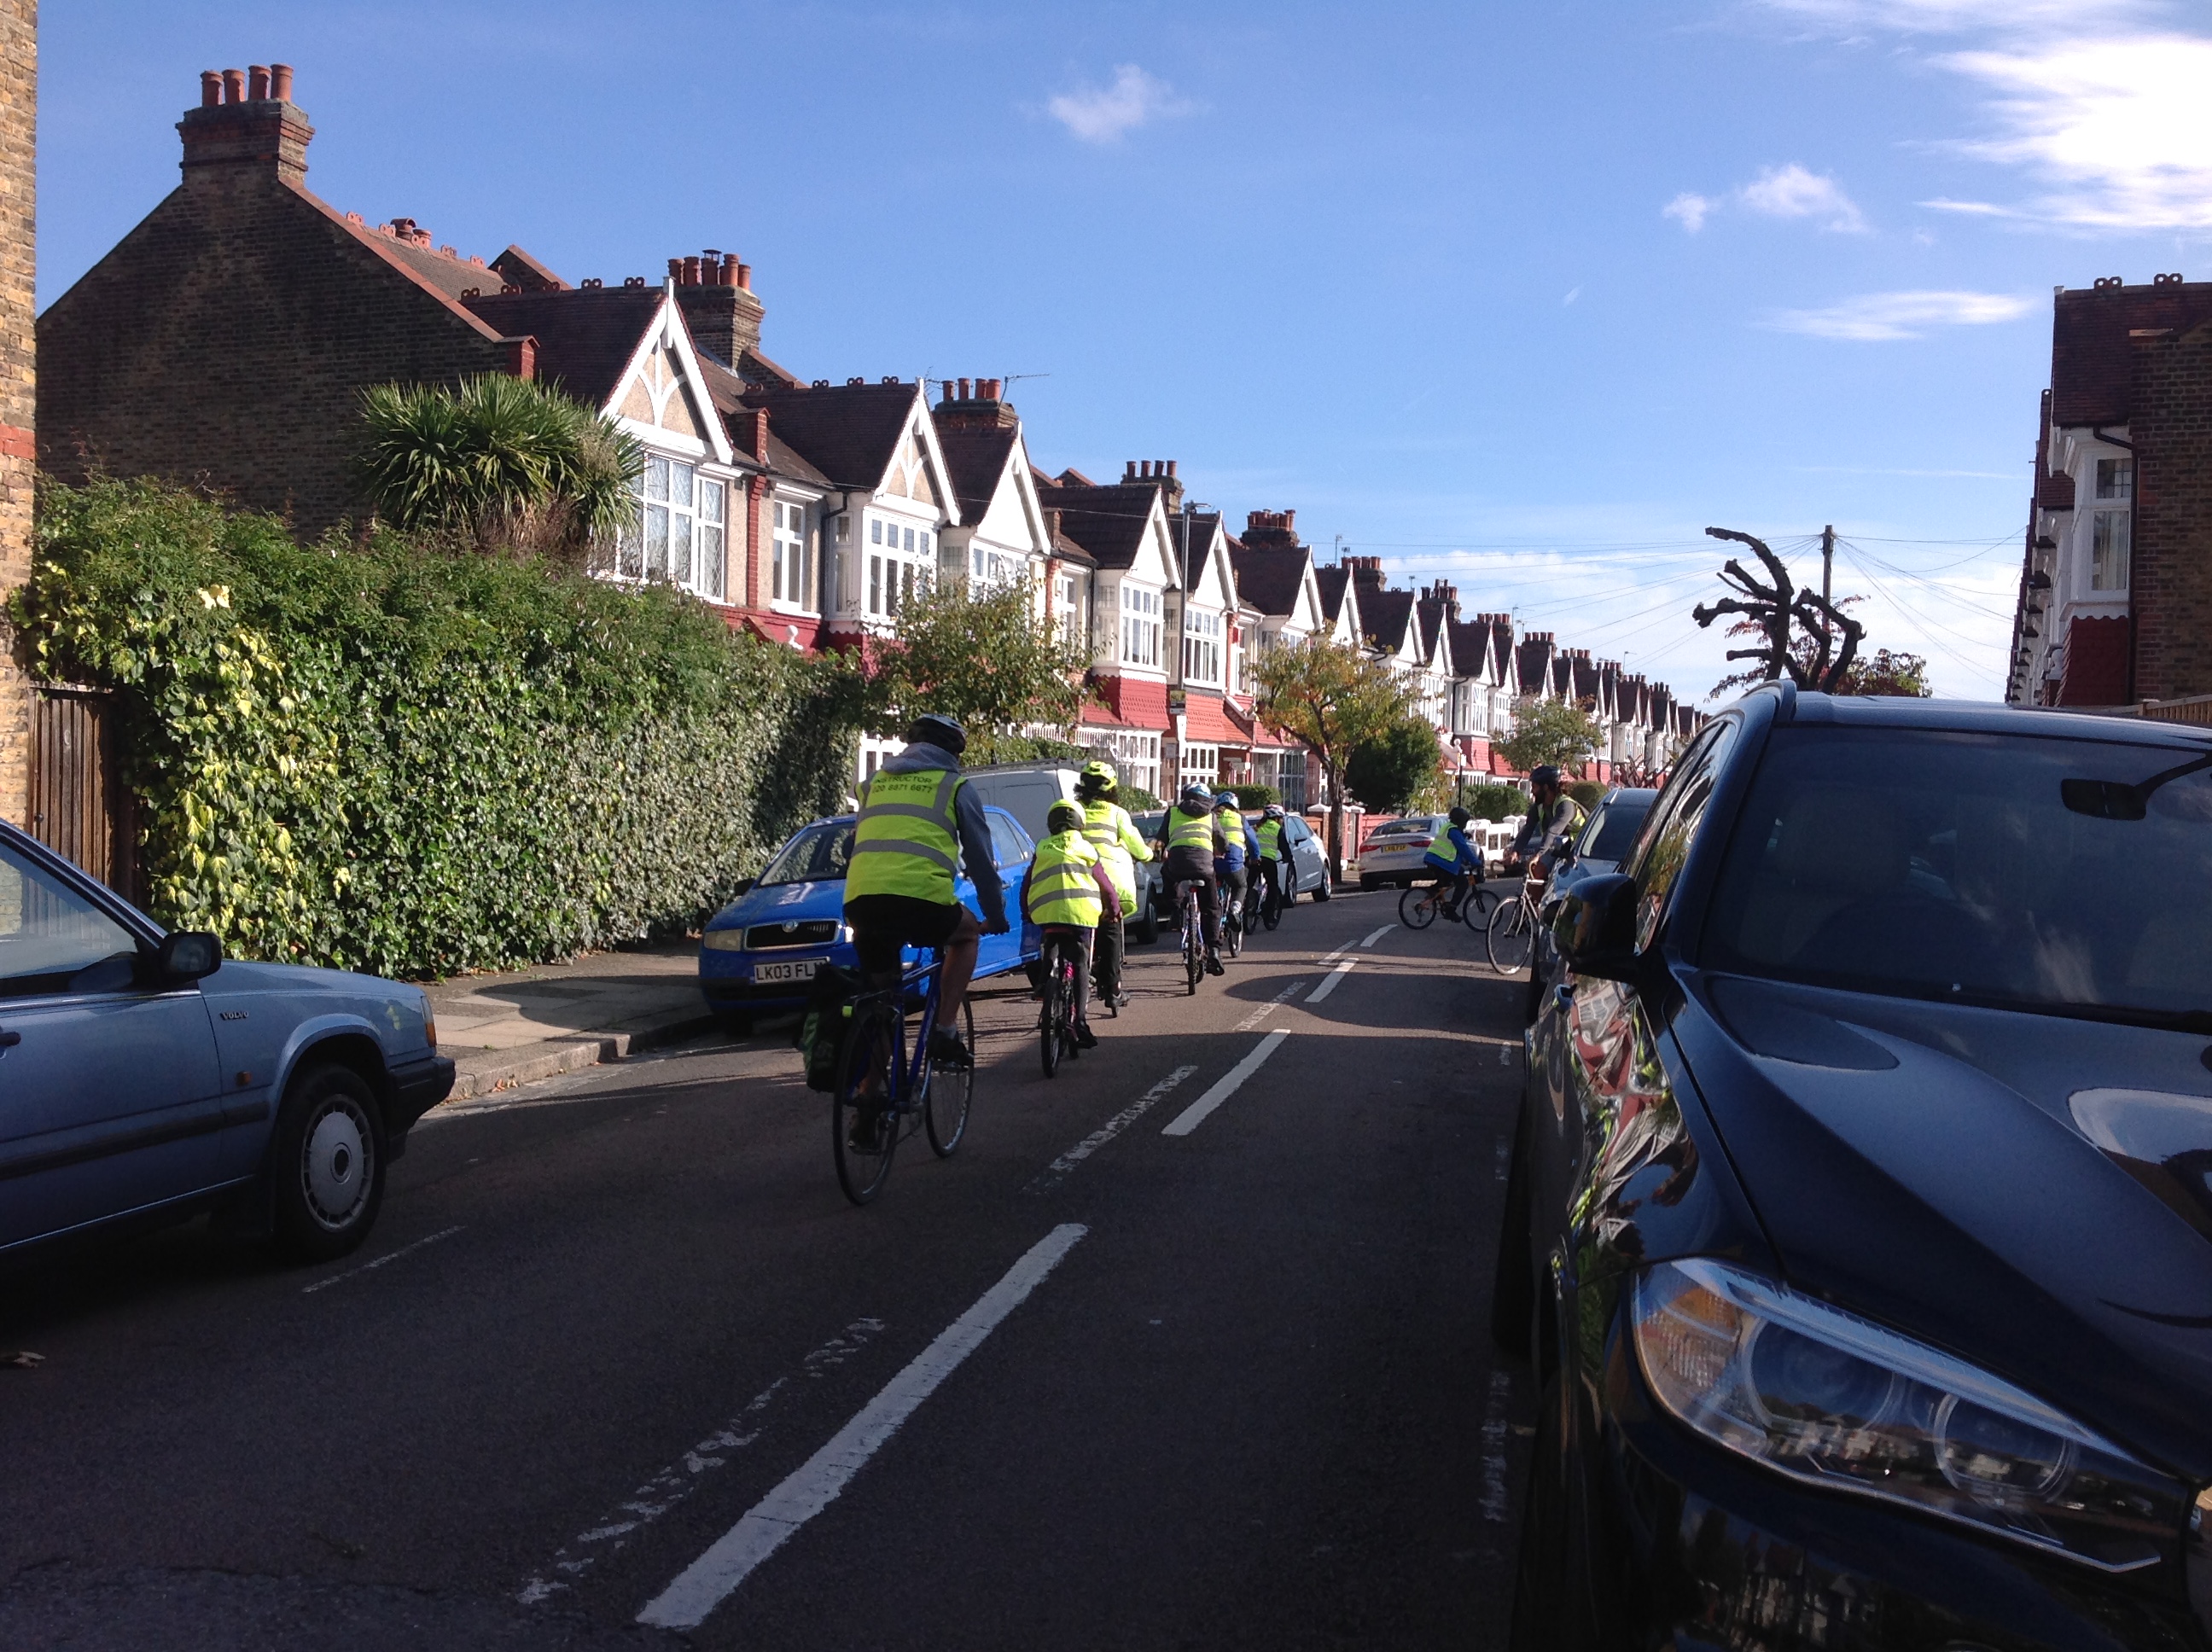 Image of some Year 6 pupils wearing high visibility vests and cycling on the road.